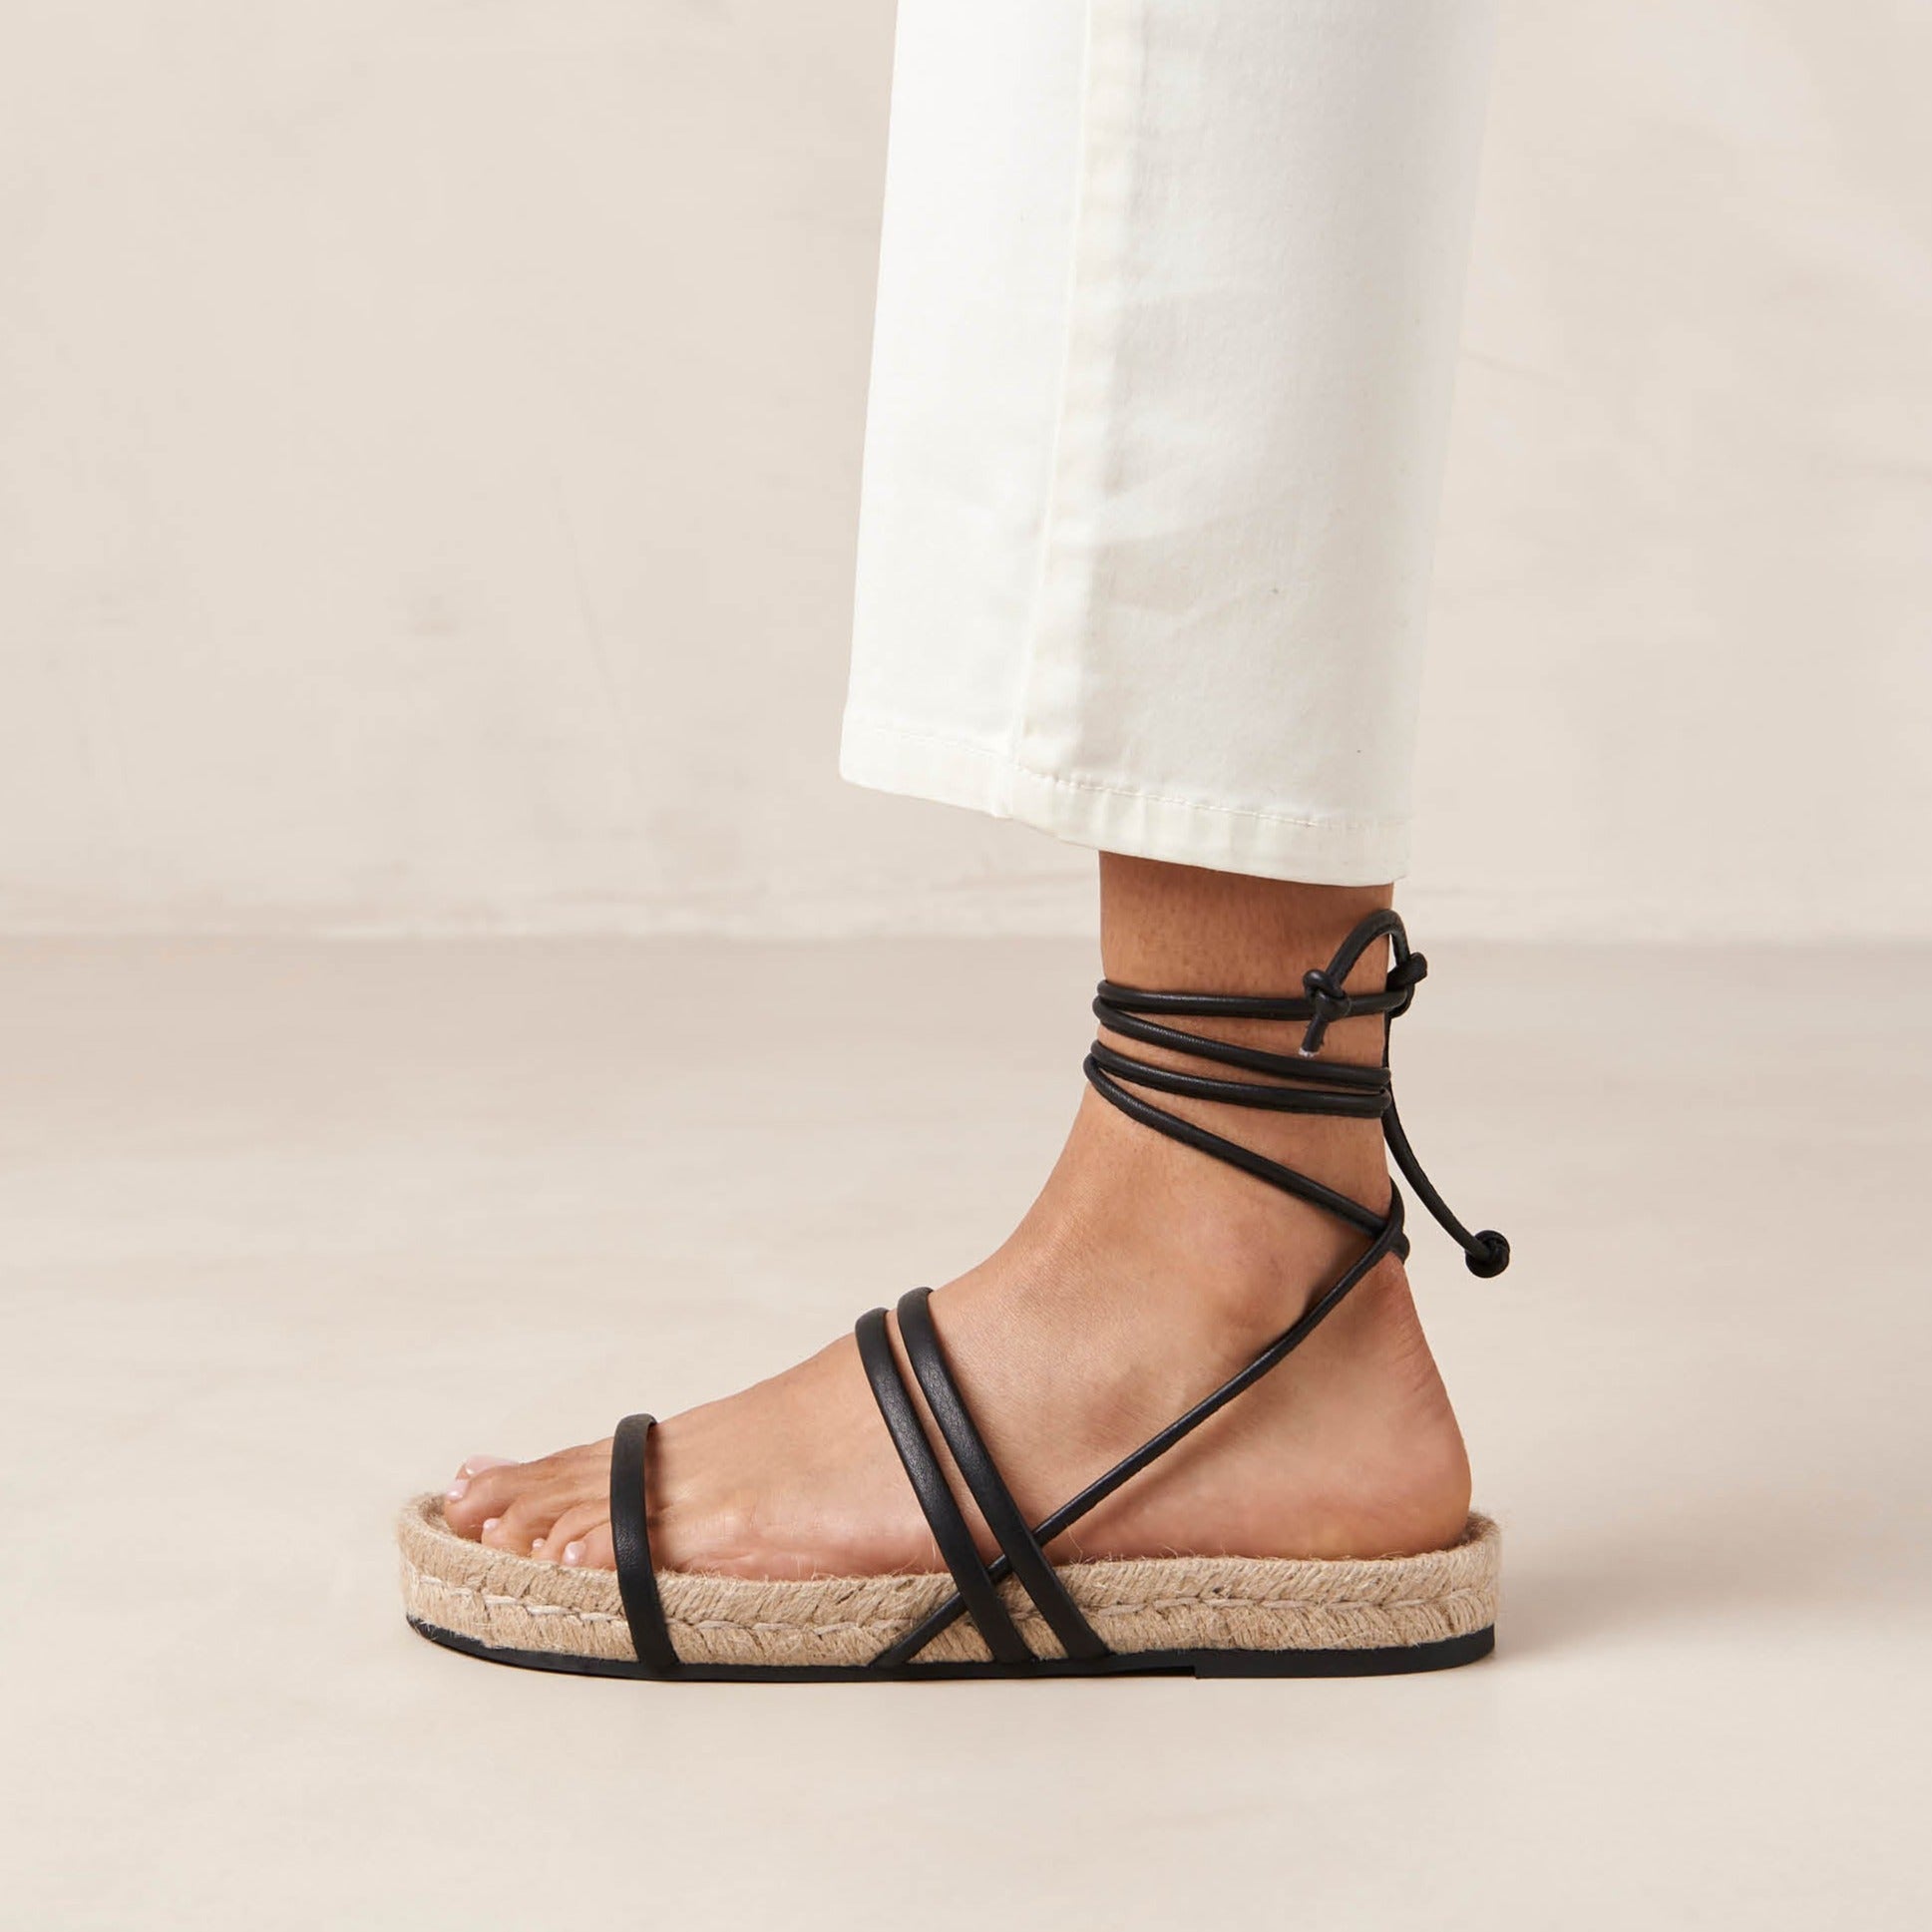 Rayna Black Leather Sandals